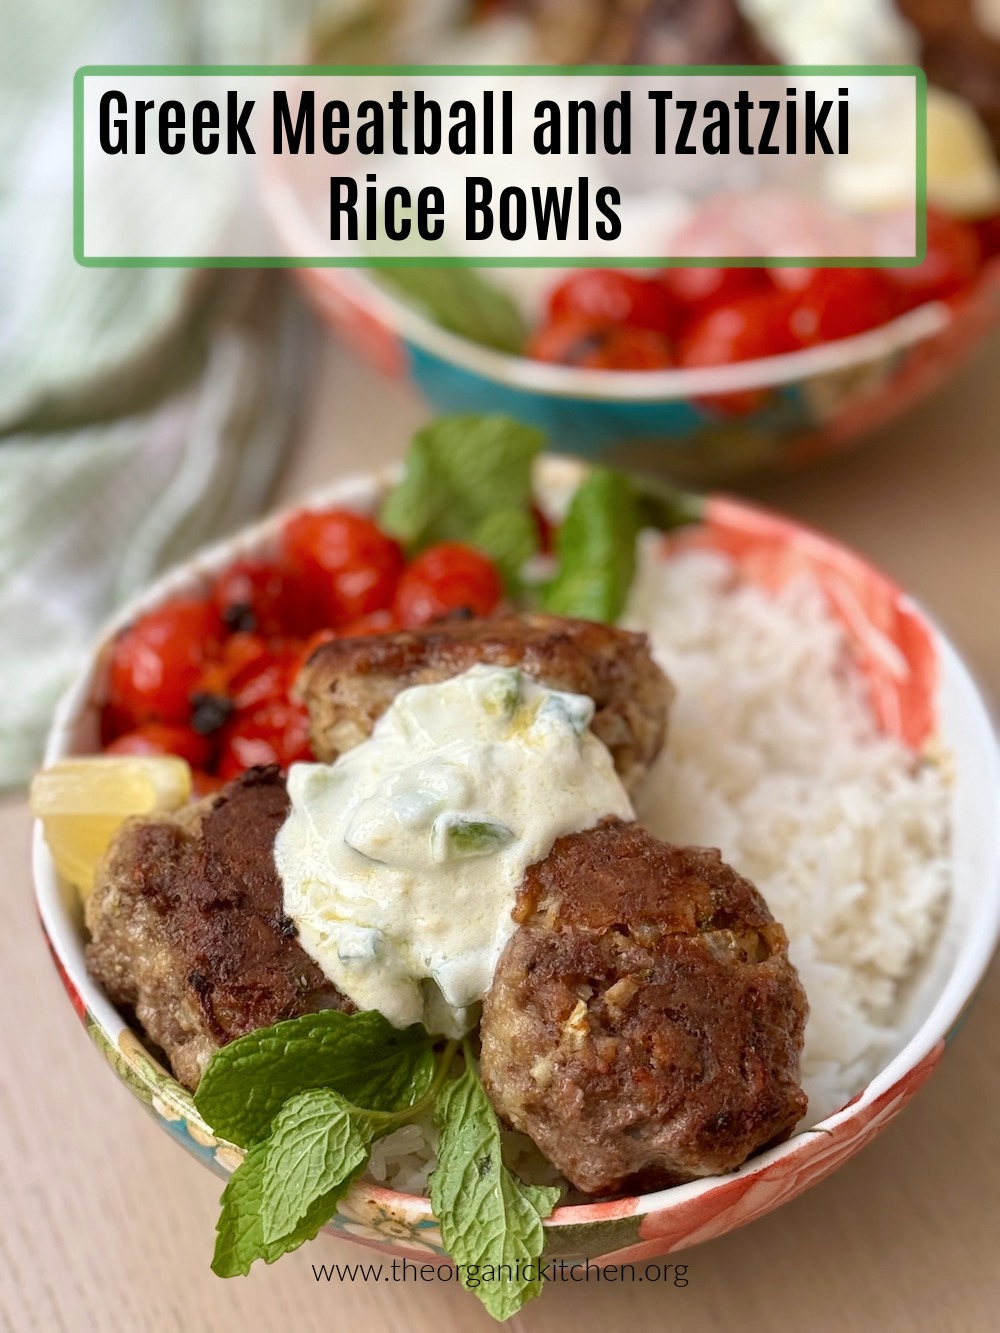 Two Greek Meatball and Tzatziki Rice Bowls garnished with mint and lemon wedges